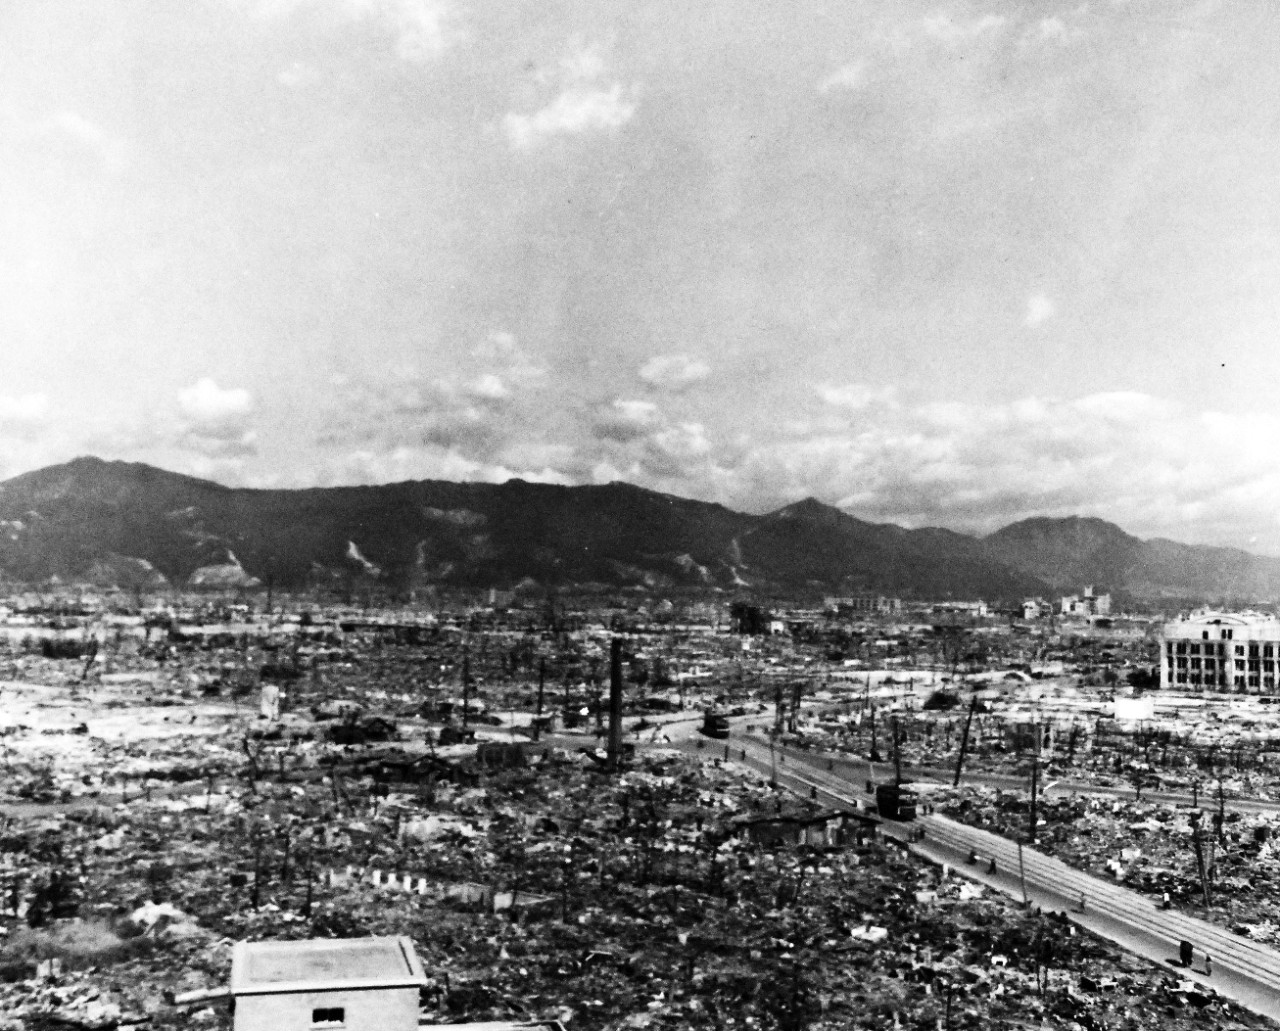 80-G-373269:  Hiroshima, Japan, 1945.   Atomic Bomb damage to Hiroshima, Japan.  Photograph released, October 14, 1945.  U.S. Navy Photograph, now in the collections of the National Archives. (2015/12/08).